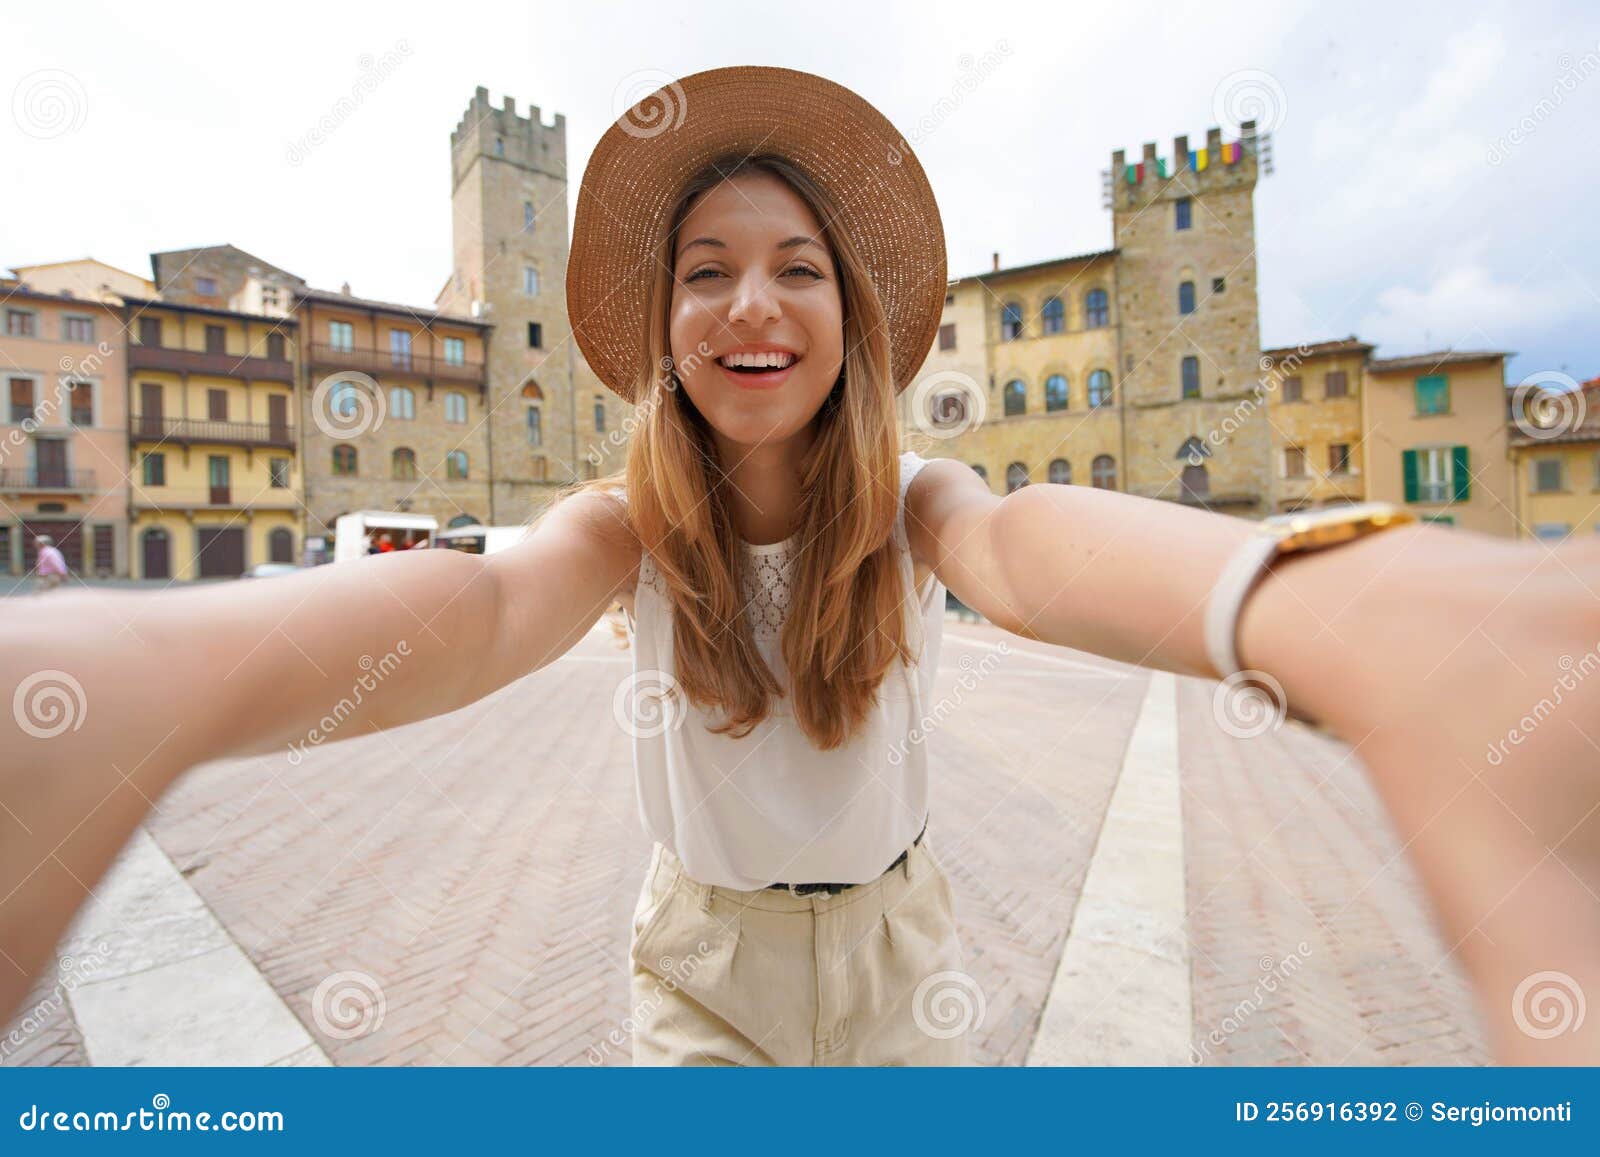 traveling in tuscany. smiling tourist girl in piazza grande square in the historic town of arezzo, tuscany, italy